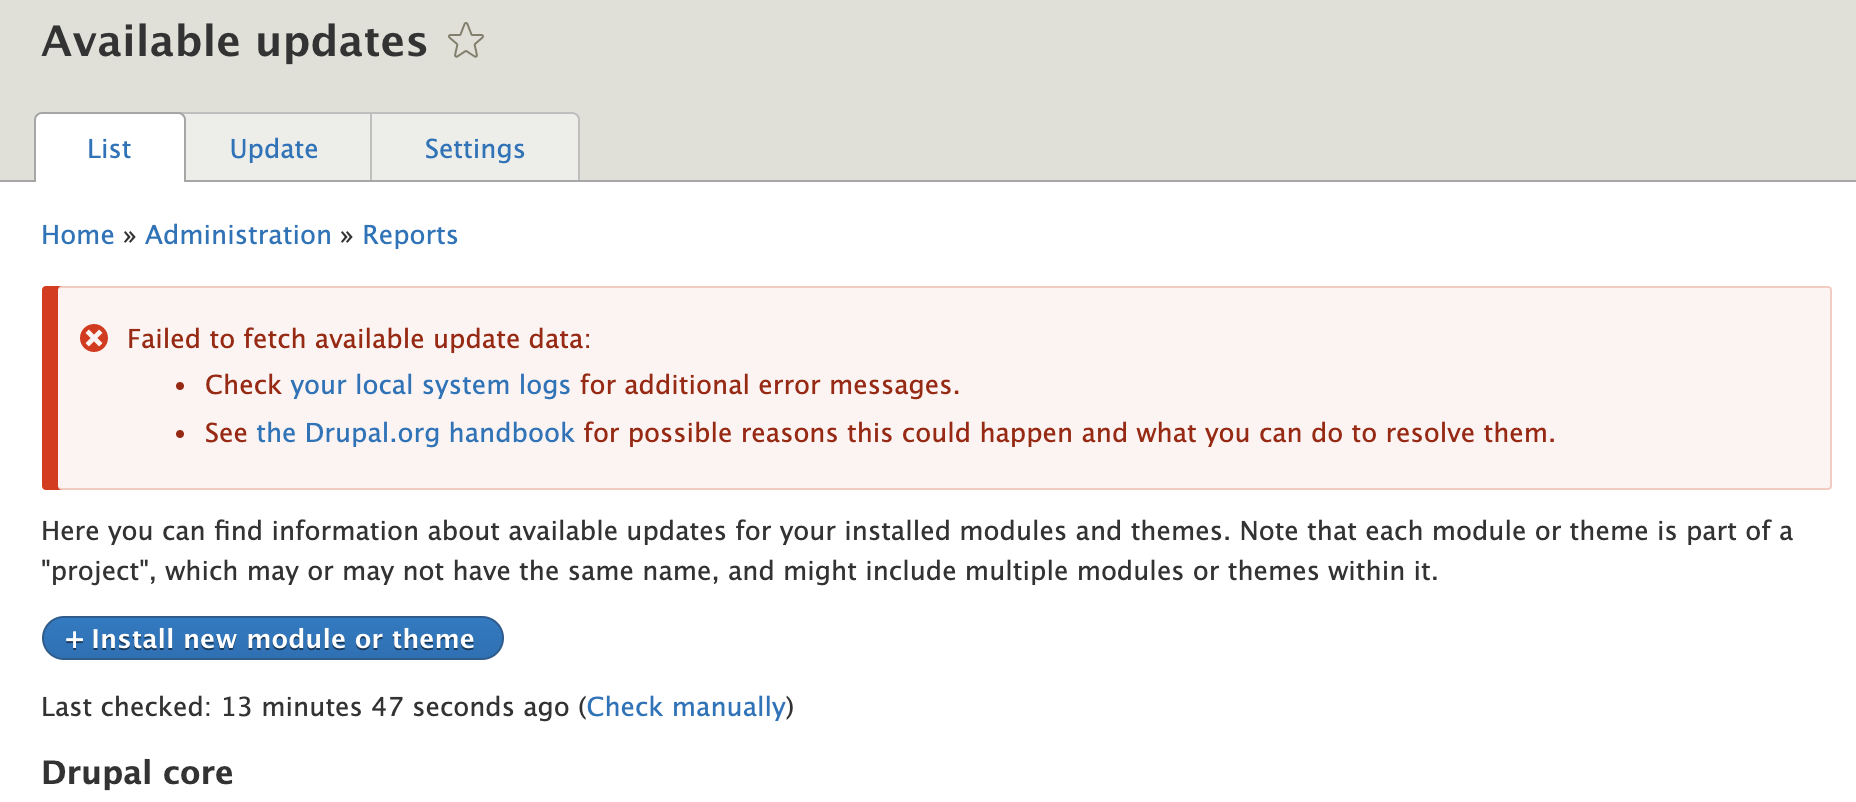 Available updates report when we fail to fetch update data, error message from the Messenger service